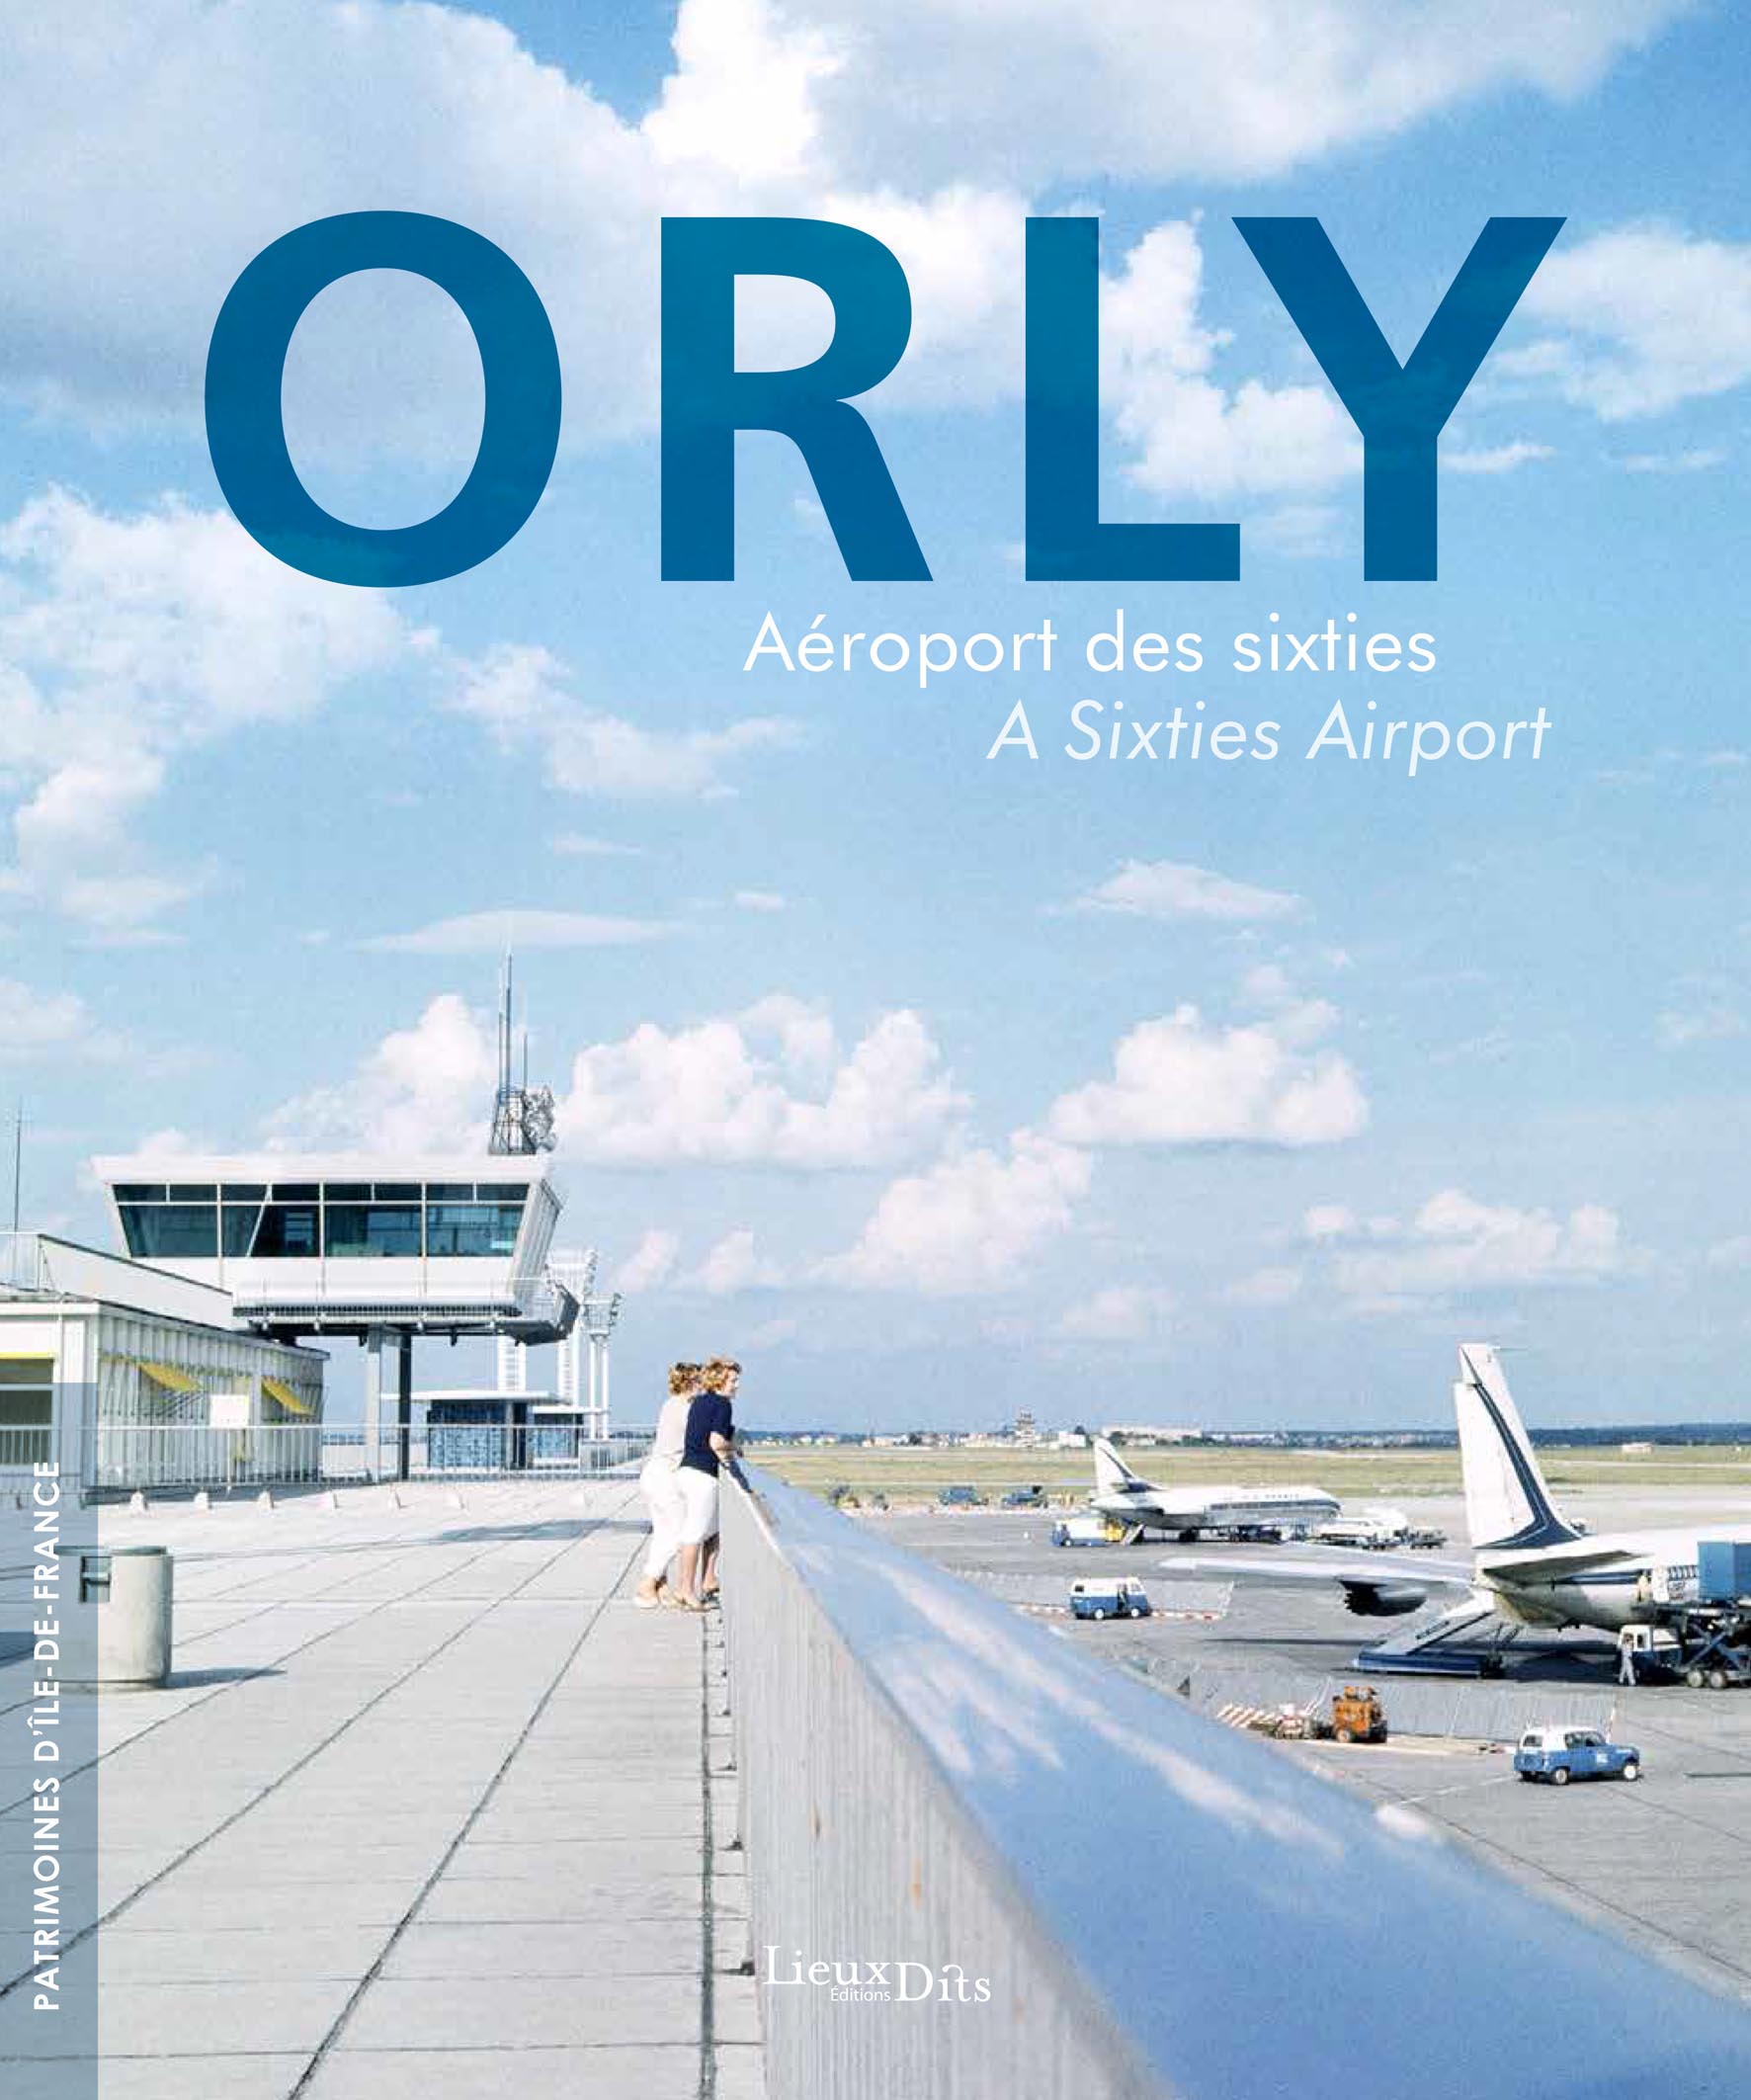 orly-a-roport-des-sixties-a-sixties-airport-editions-lieux-dits